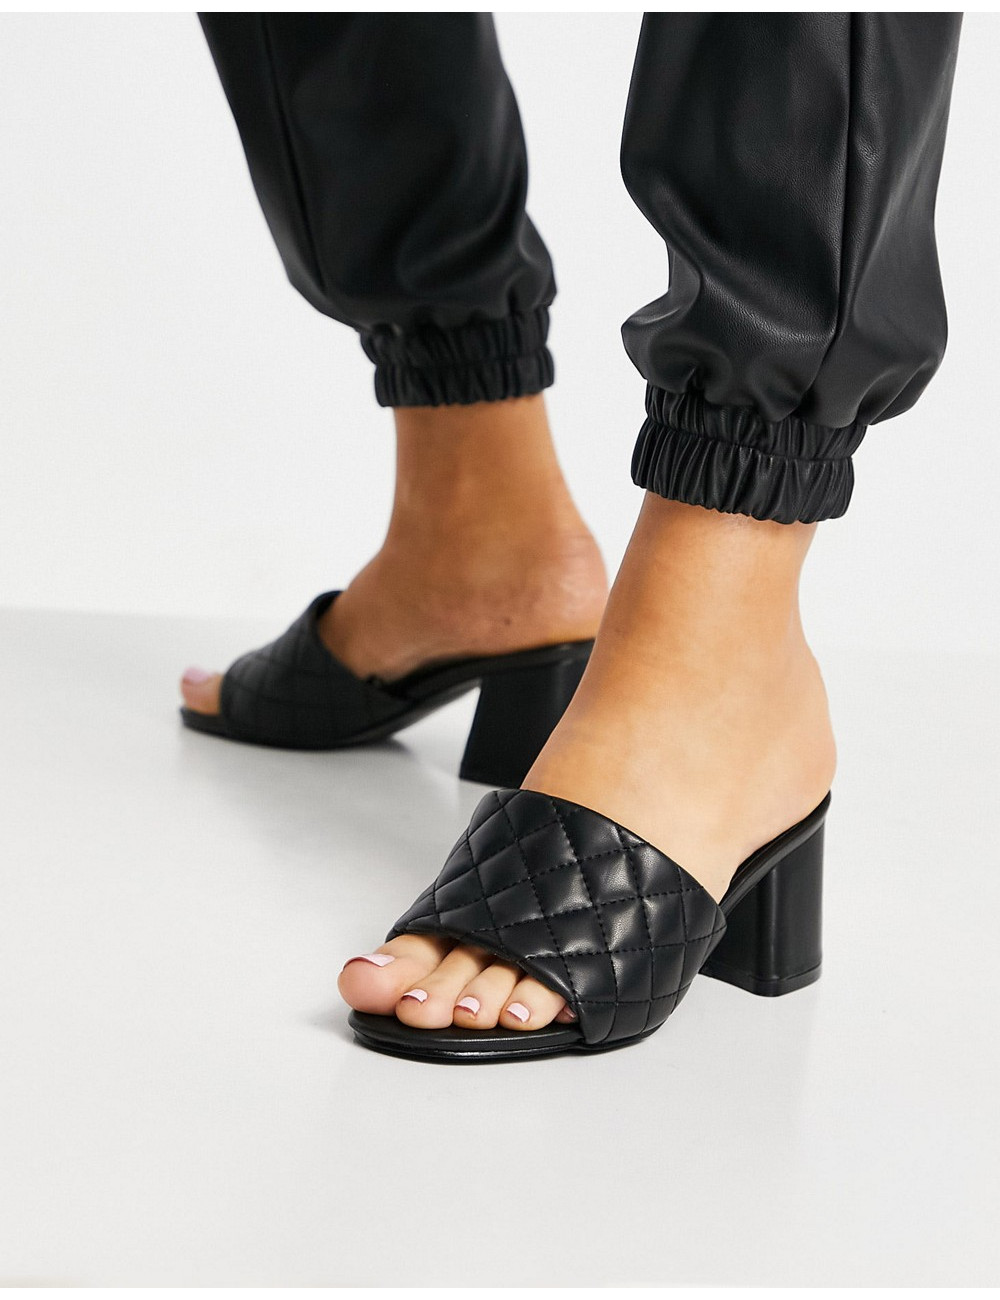 Yours quilted heeled mules...